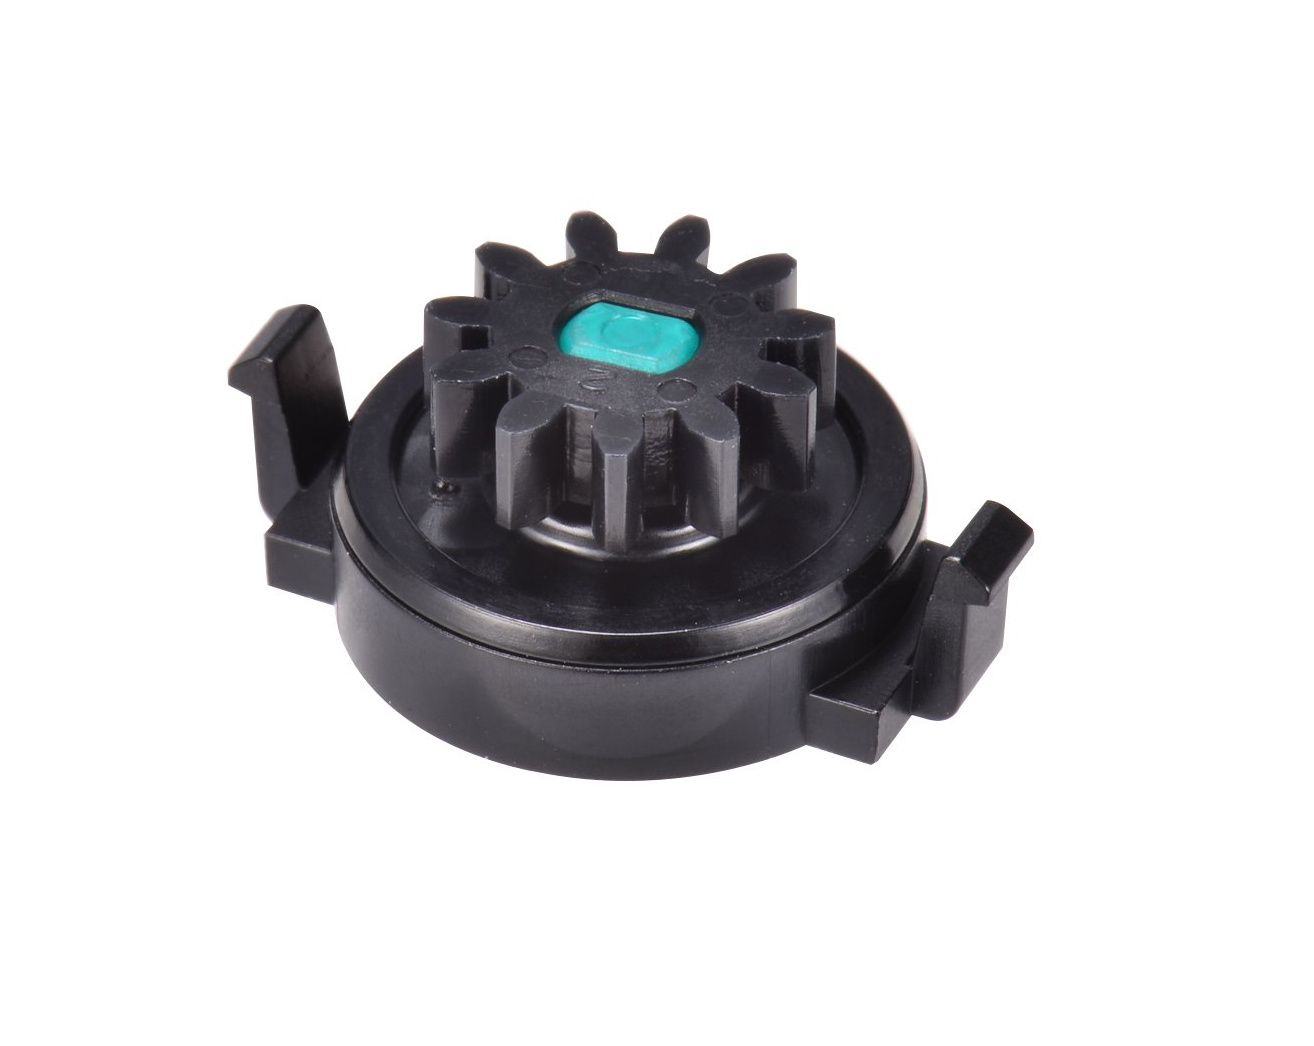 Auto Interior Accessories Plastic Rotary Damper For Car Cup Holder Ash Tray Soft Close